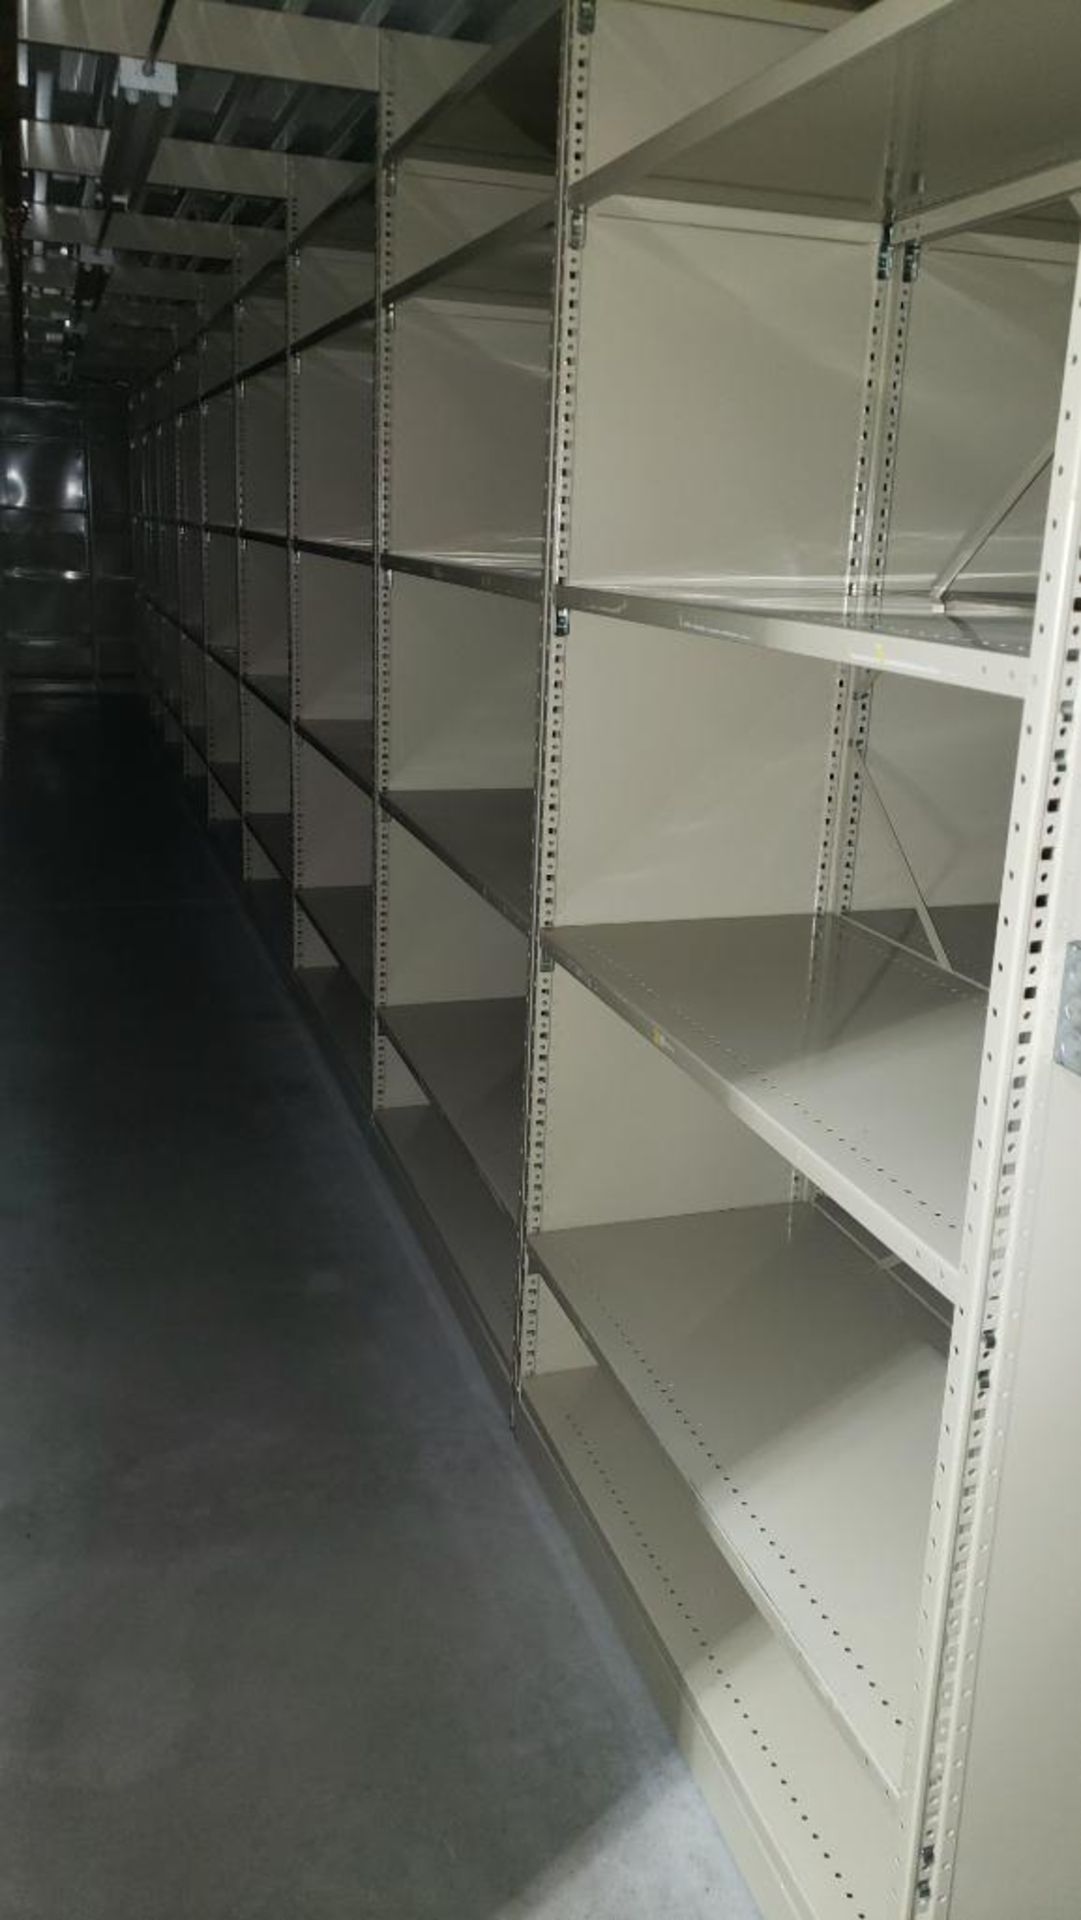 Qty 18 - Sections of shelving: Single shelf dimensions 97" tall X 48 1/32" wide X 21 1/16" deep.